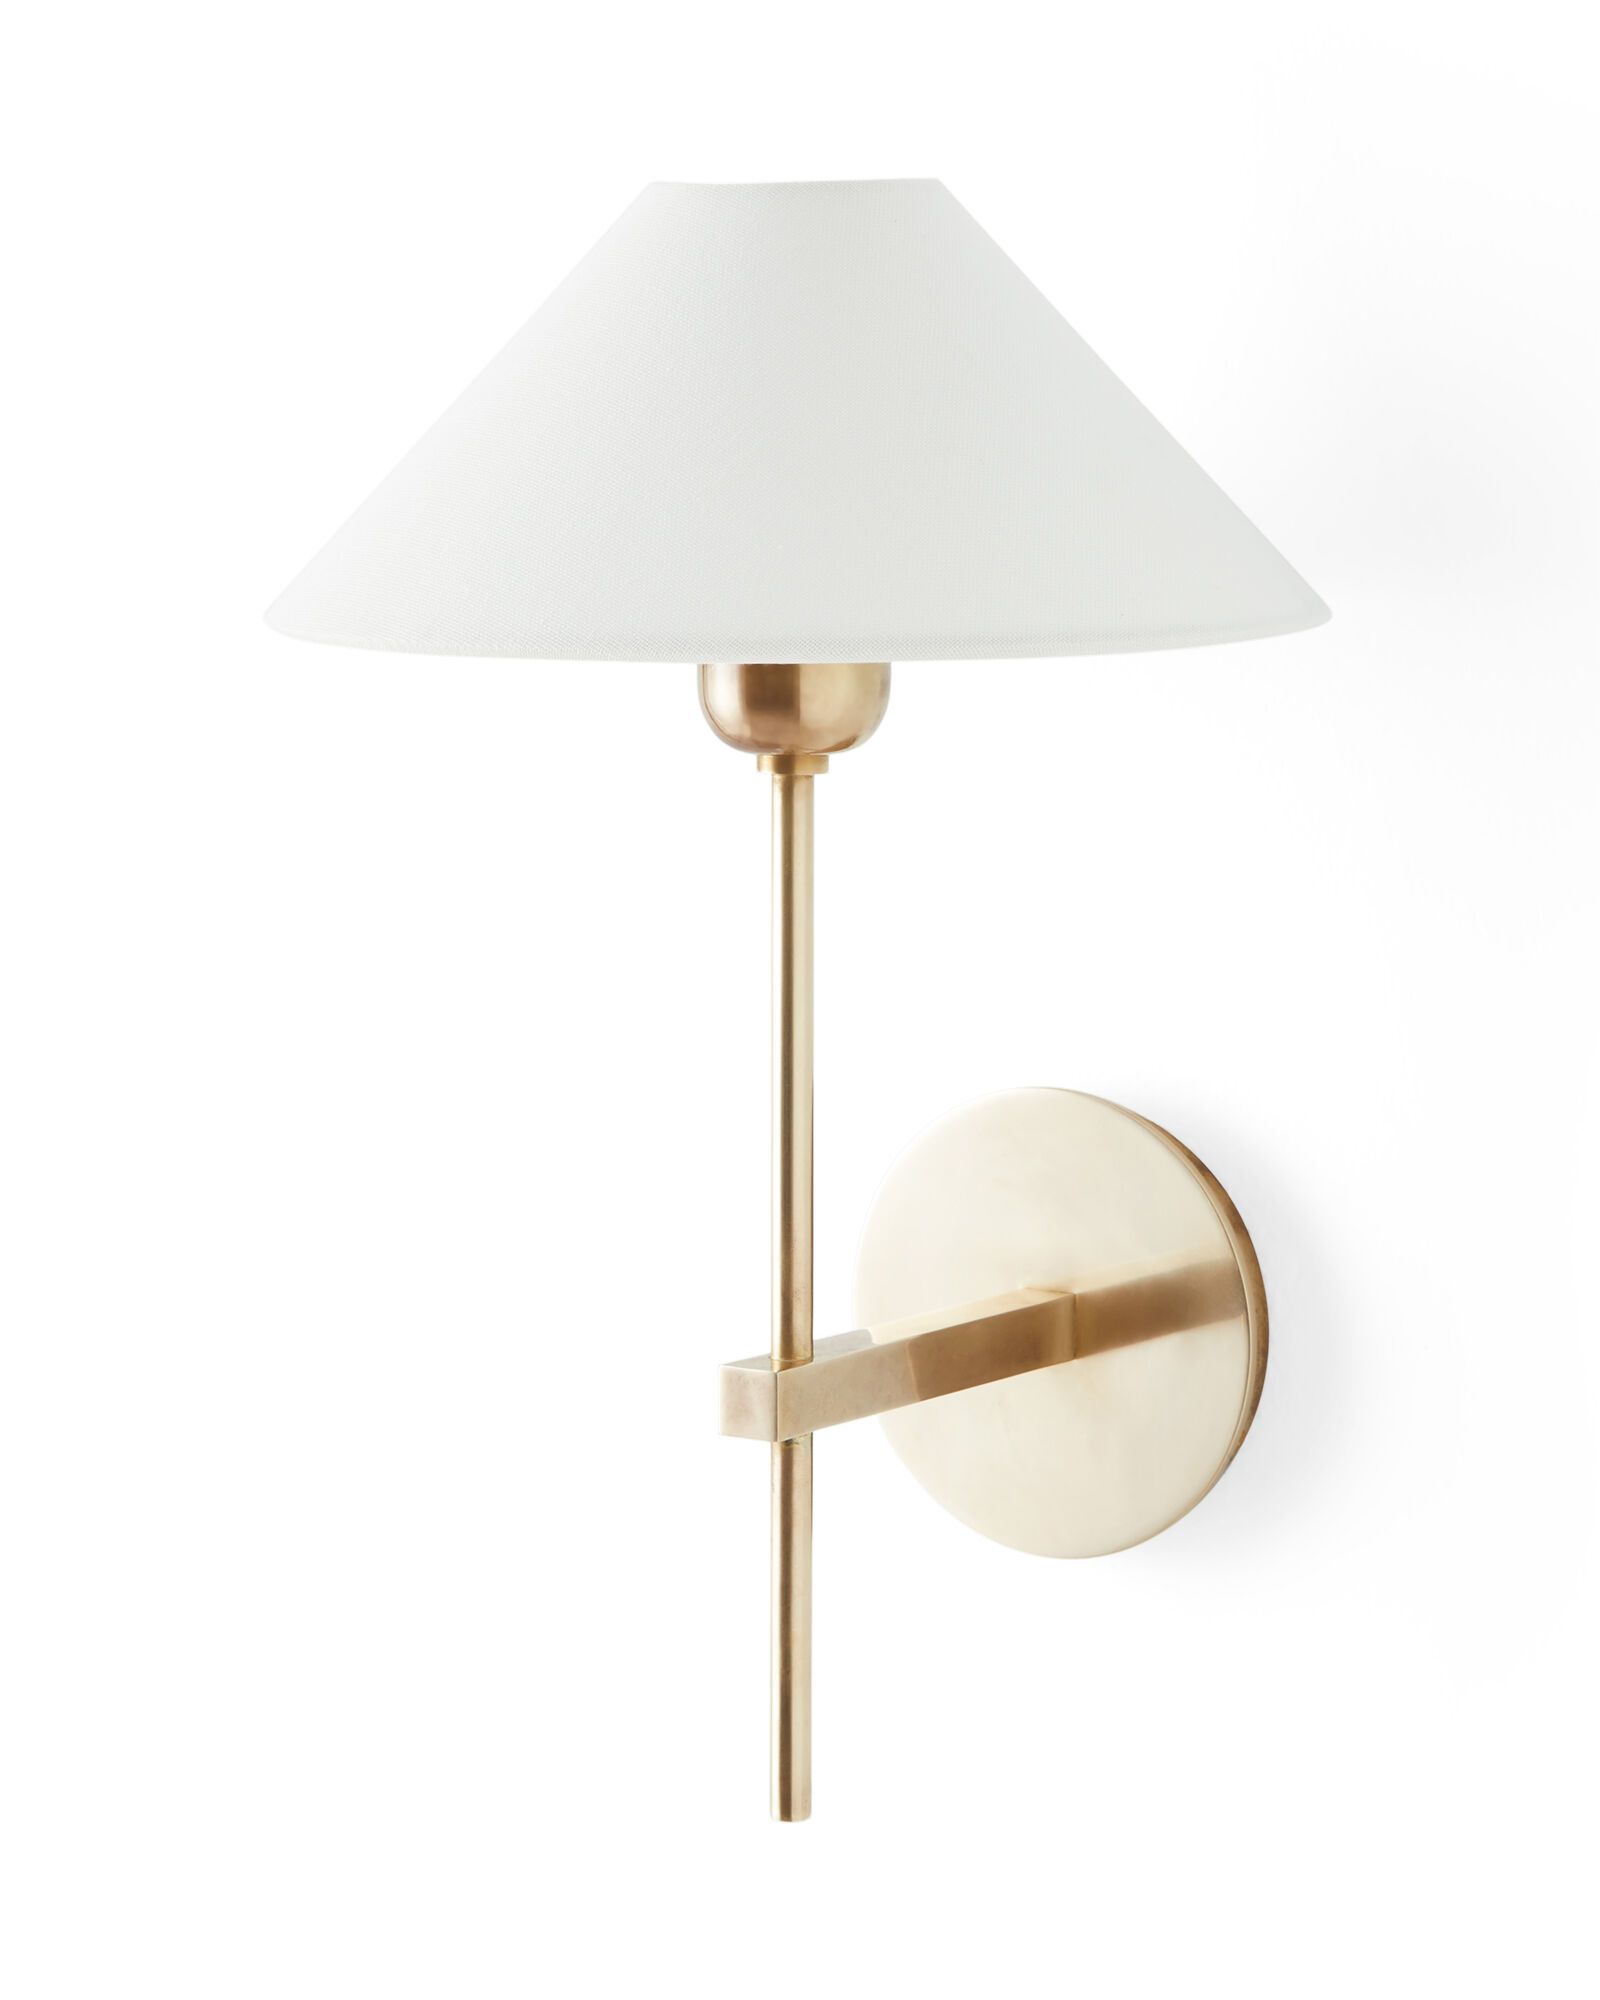 Waverly Sconce | Serena and Lily